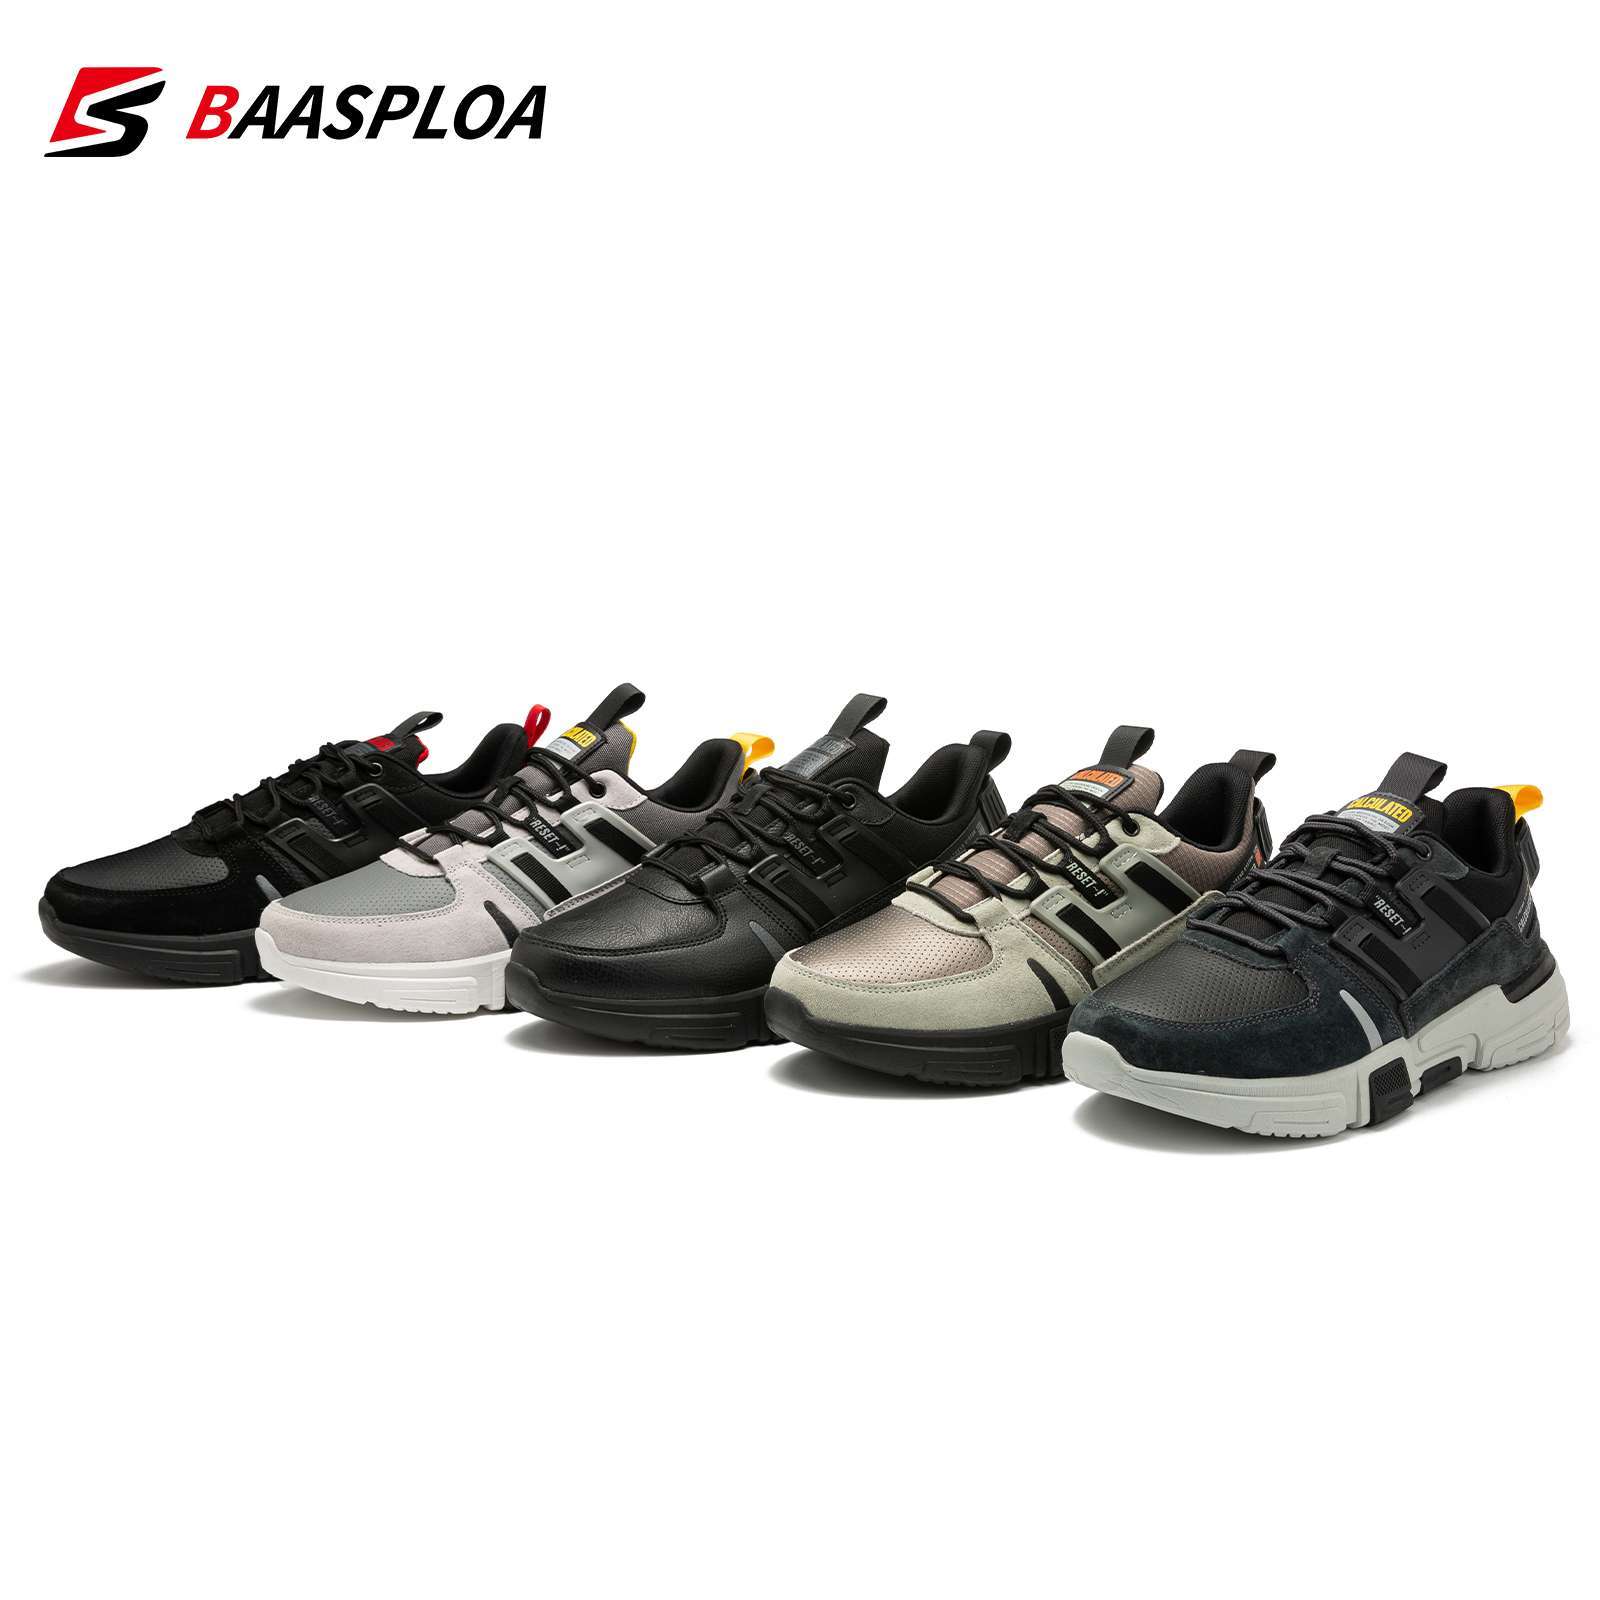 Baasploa Men Sneakers Leather Casual Walking Shoes Non slip Fashion Sneakers Comfortable Male Lace up Tenis 5